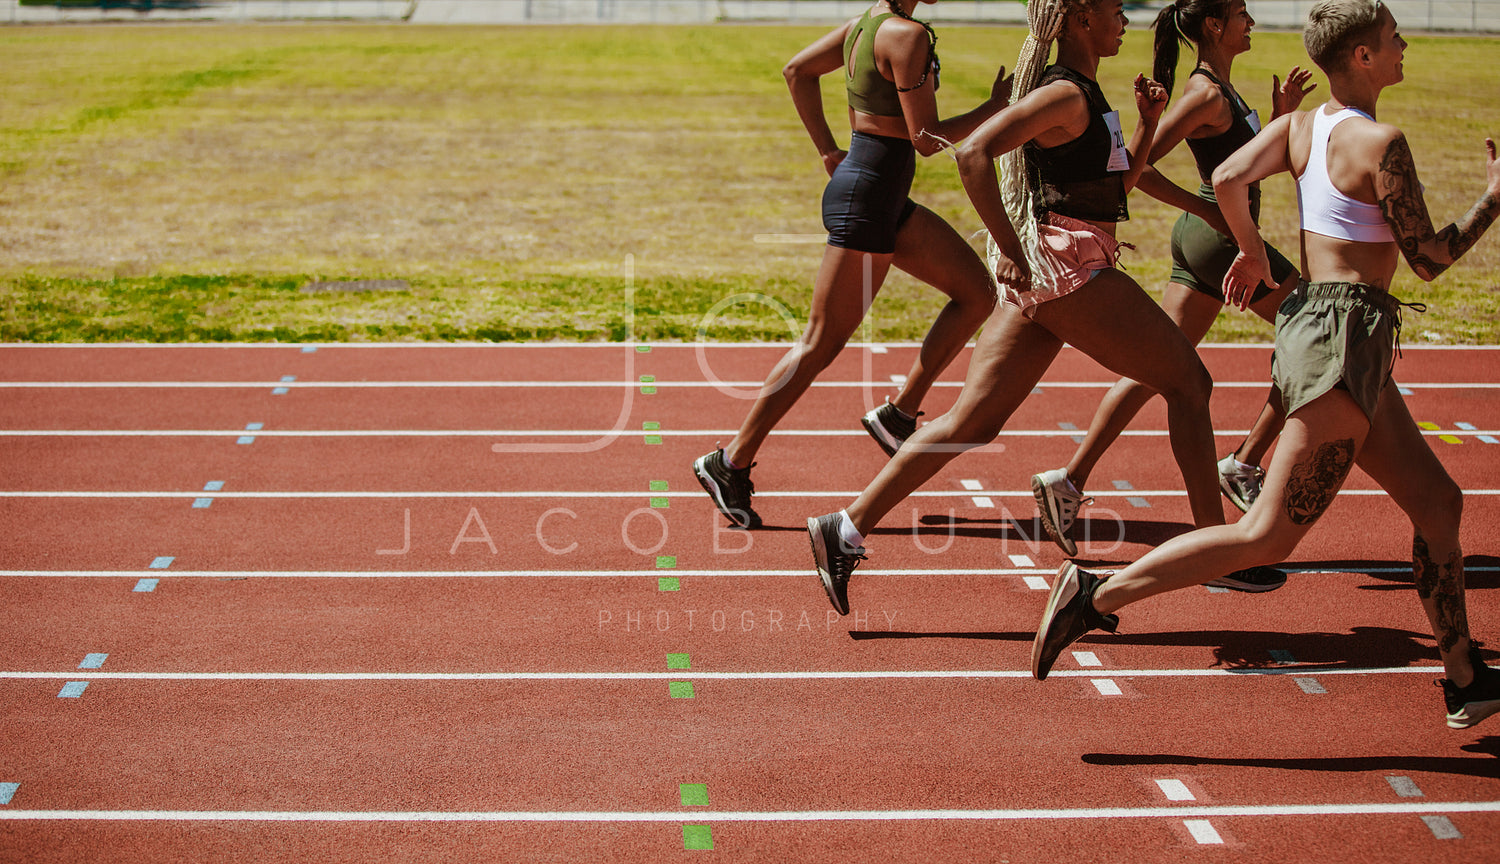 Female athletes running in competition on blue track - Stock Image